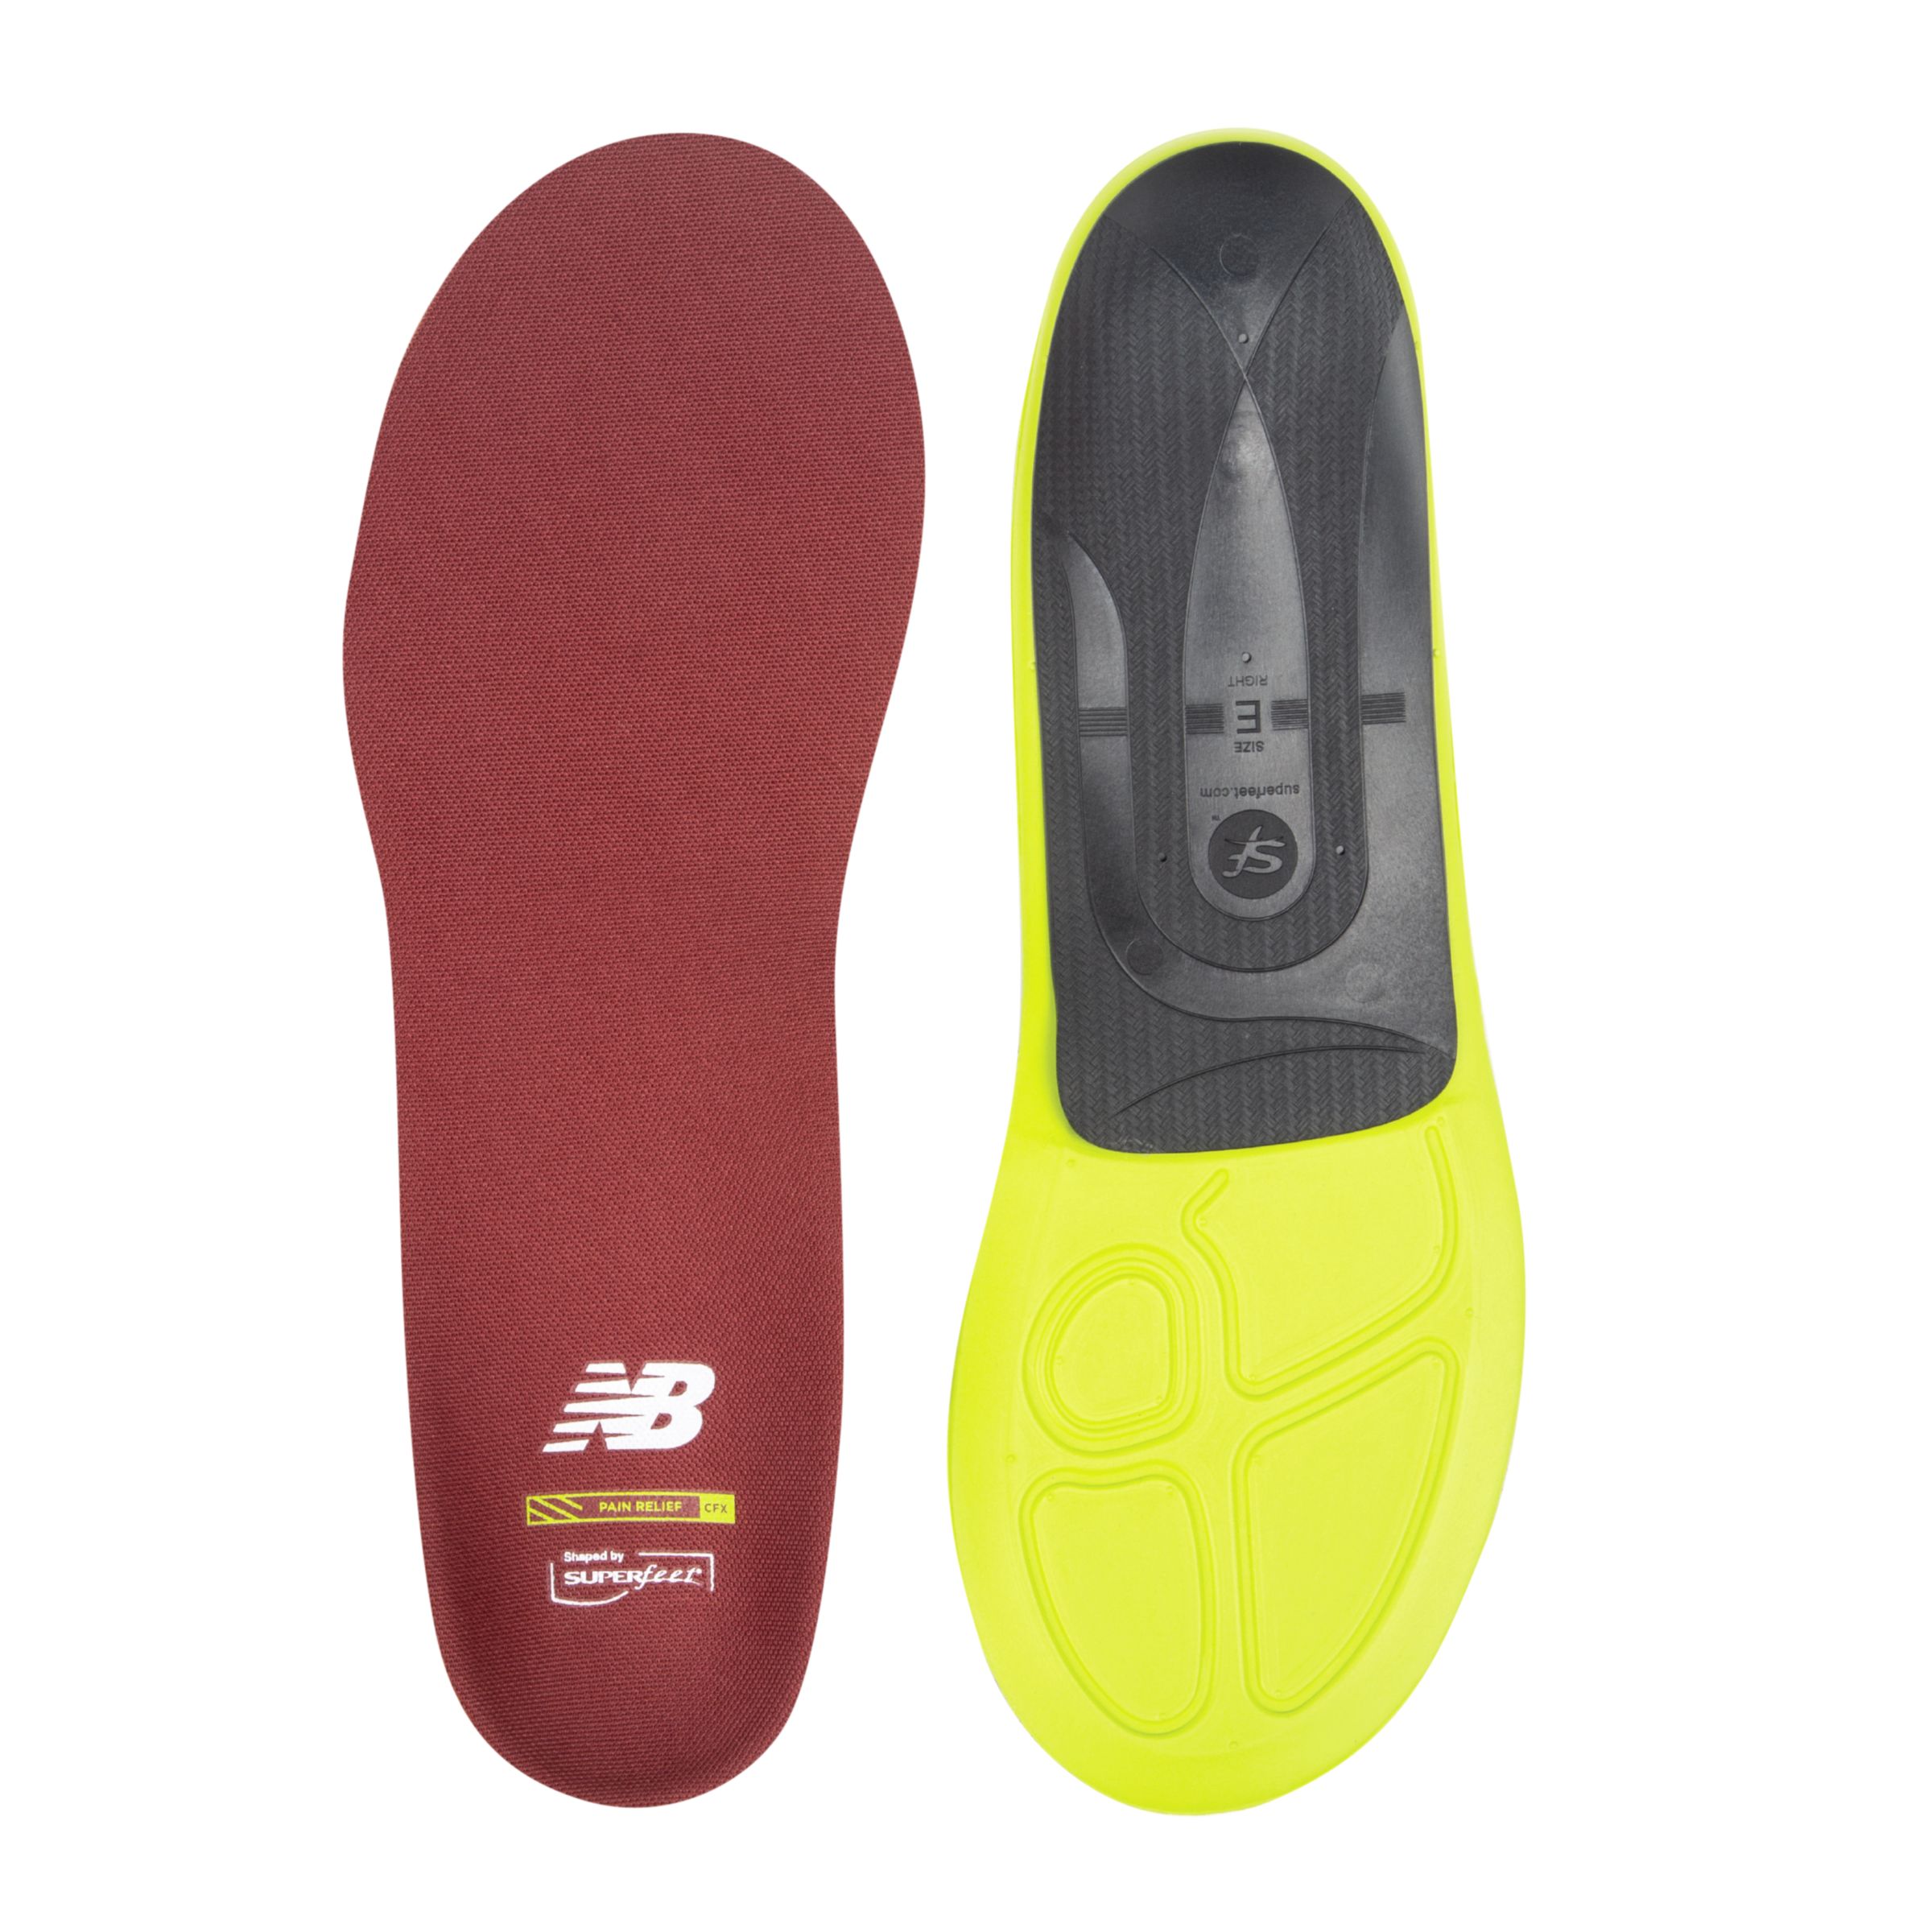 Running Pain Relief CFX Insole - New 